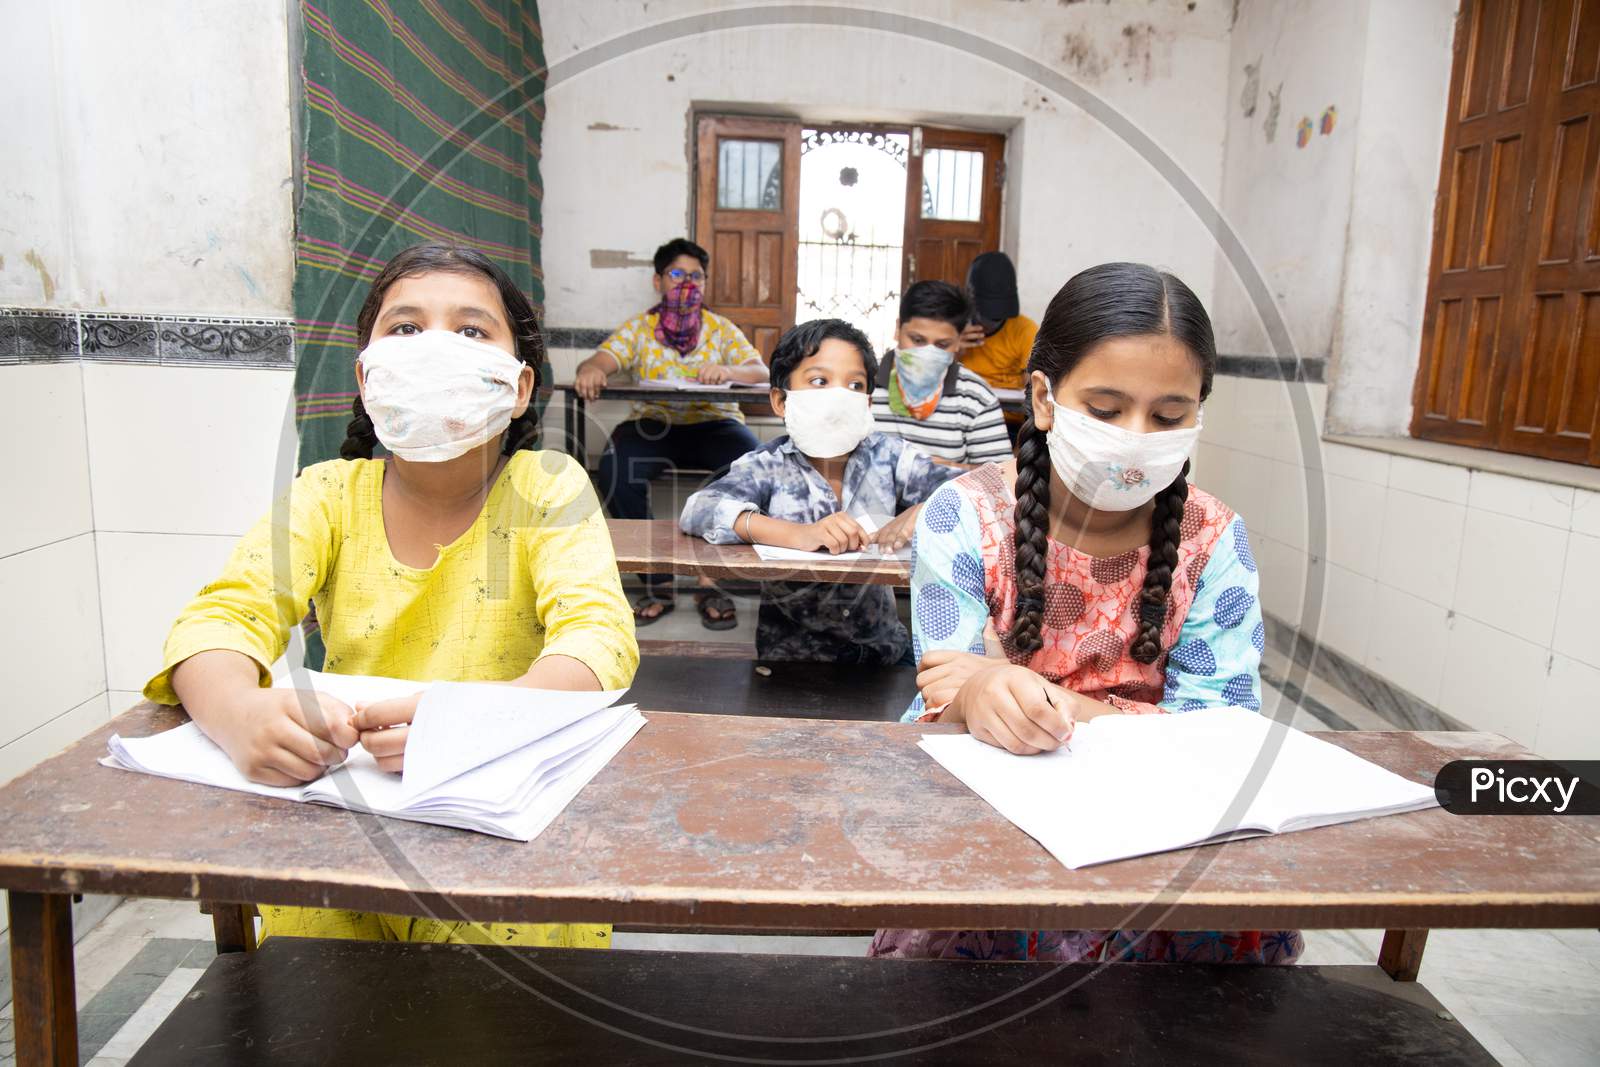 Indian Students Studying In Classroom Wearing Mask And Social Distancing, School Reopen During Covid19 Pandemic